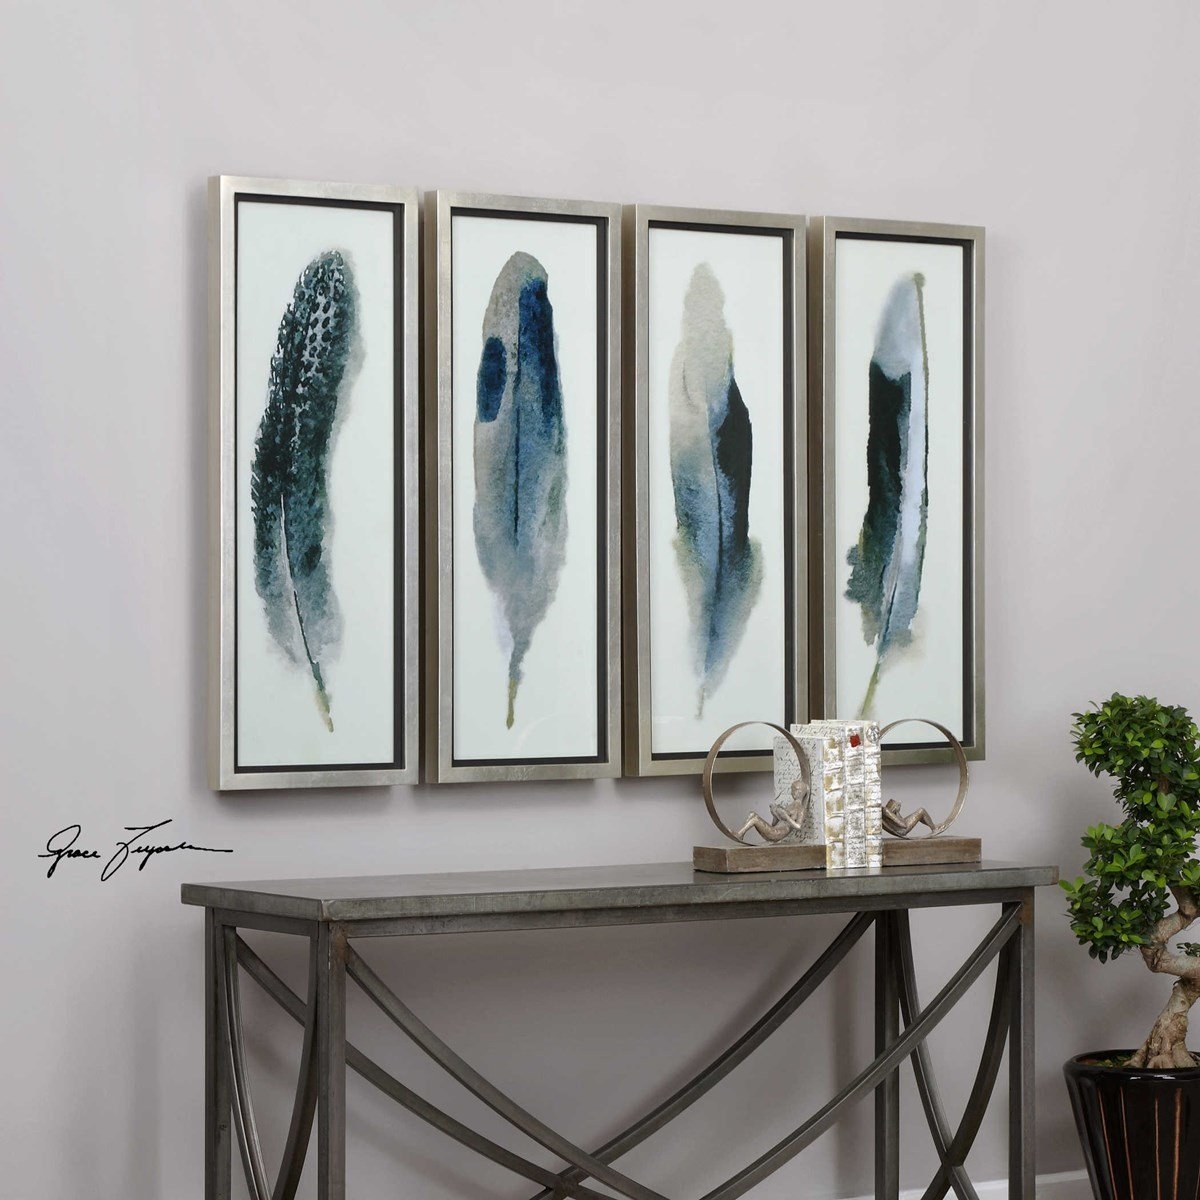 Feathered Beauty, S/4 - 14"x38" - Champagne Silver Frame - Image 1